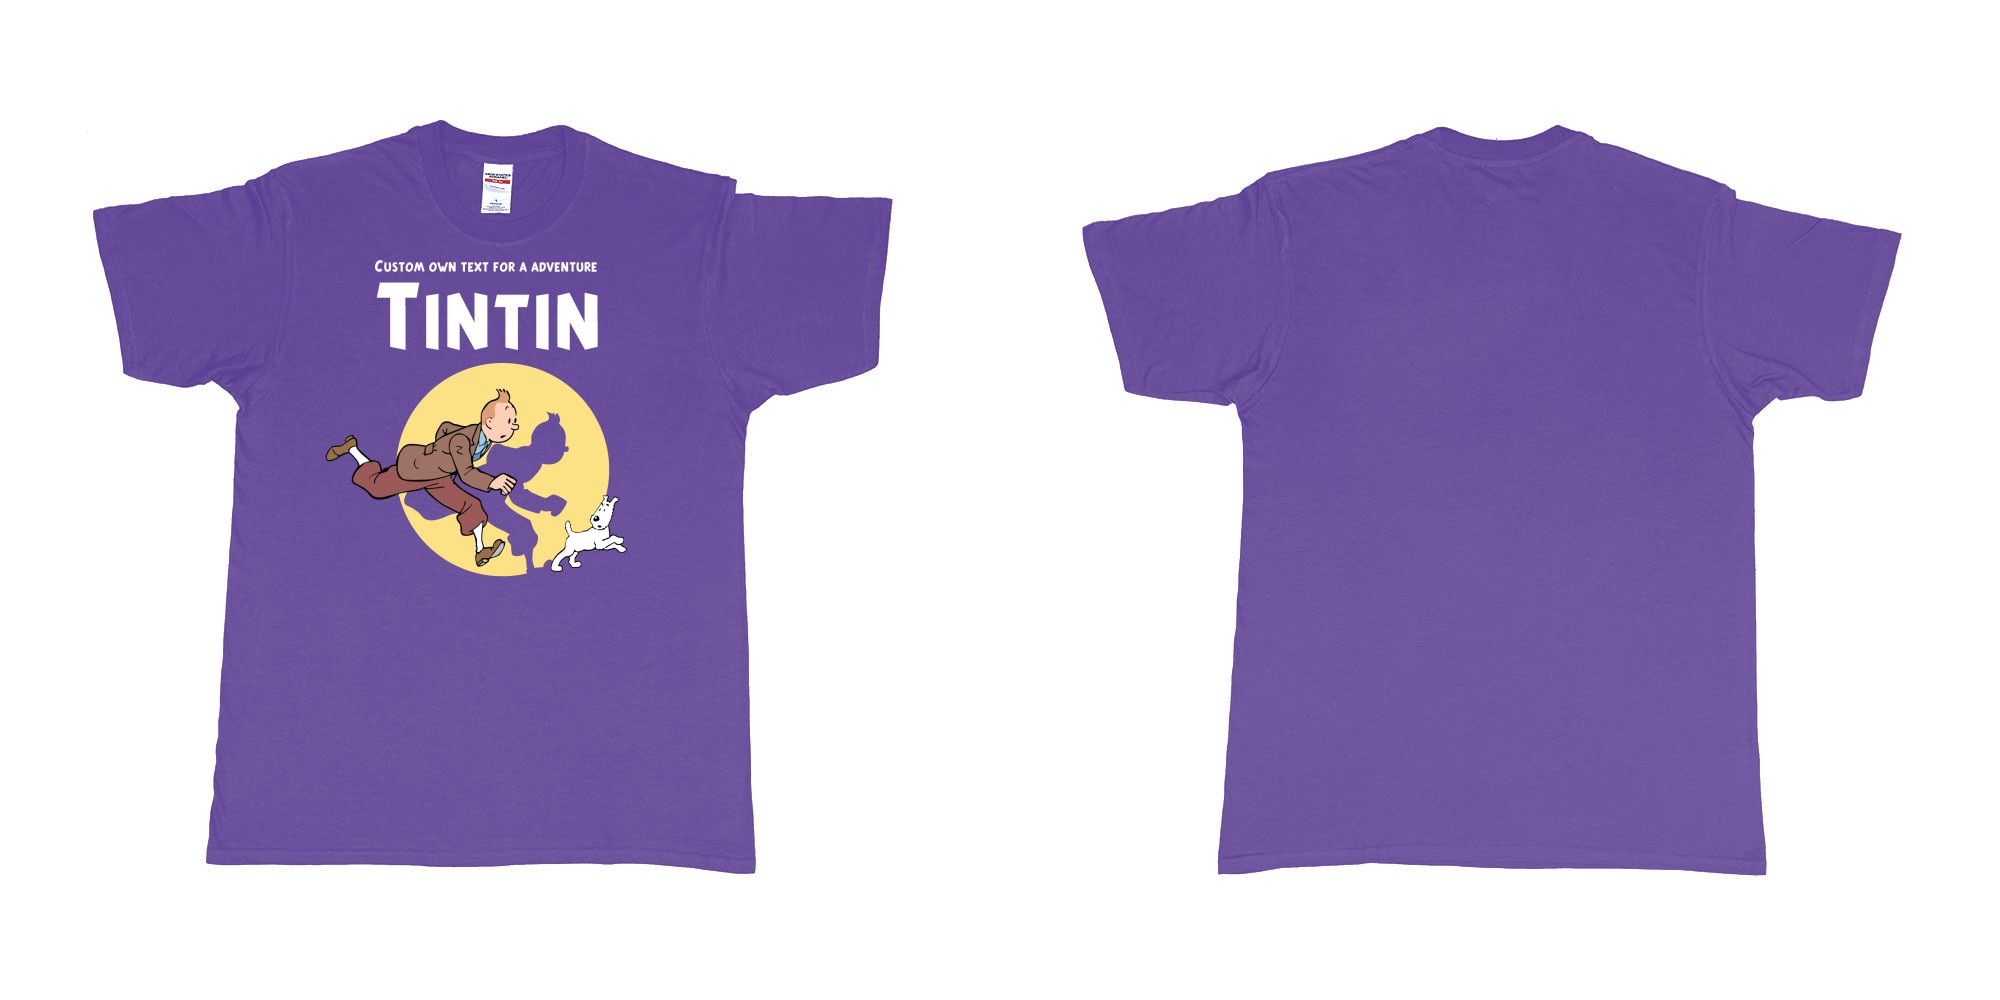 Custom tshirt design tintin custom text for adventure teeshirt printing in fabric color purple choice your own text made in Bali by The Pirate Way